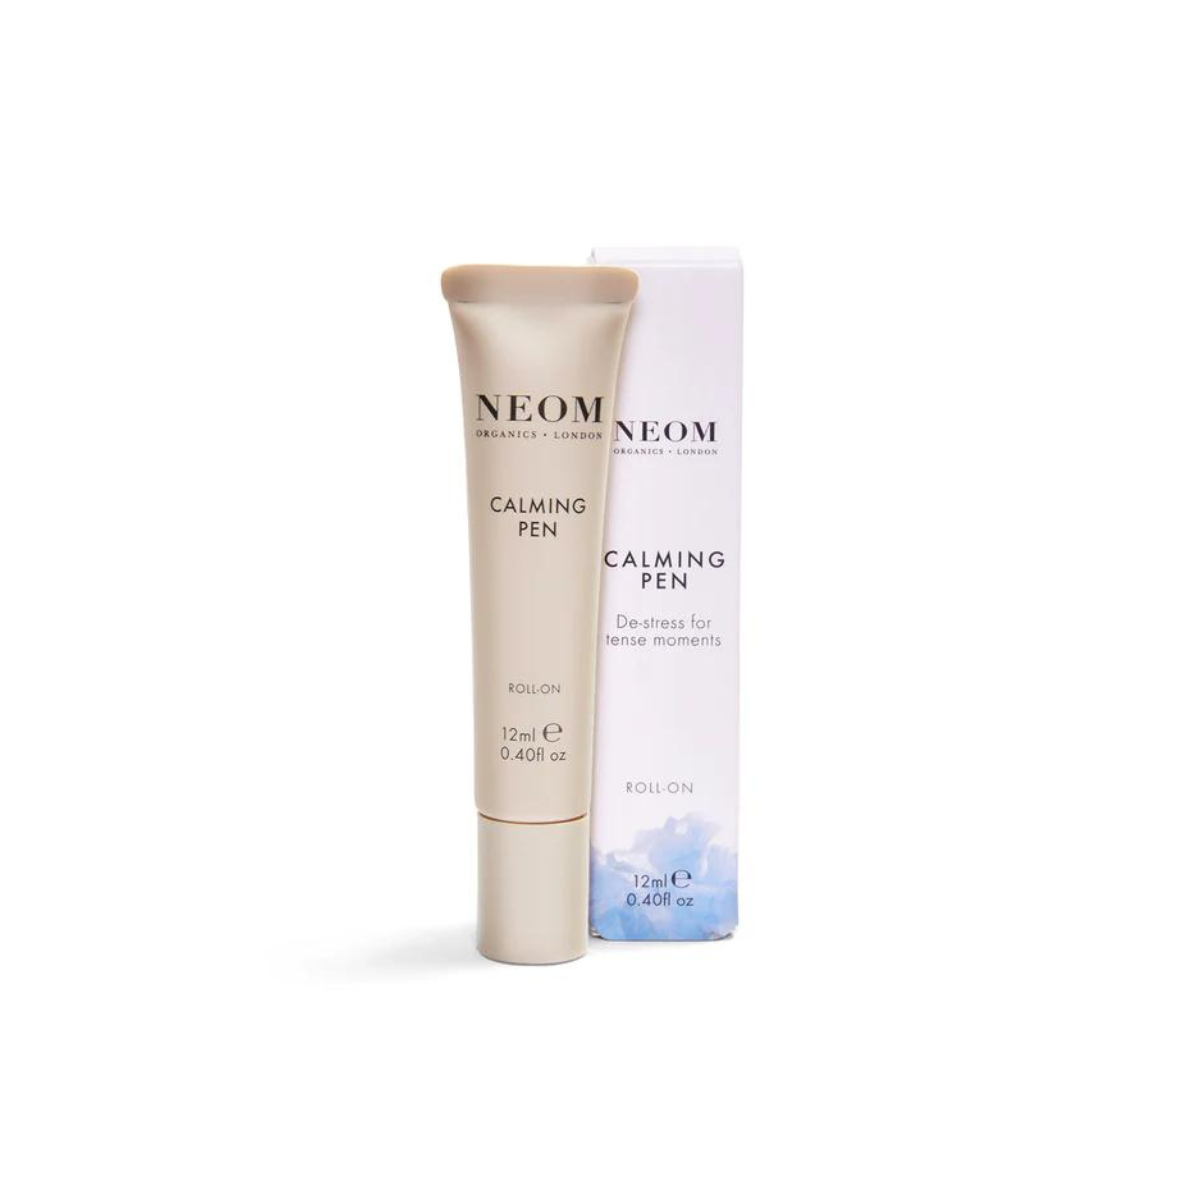 Neom Calming Pen with box